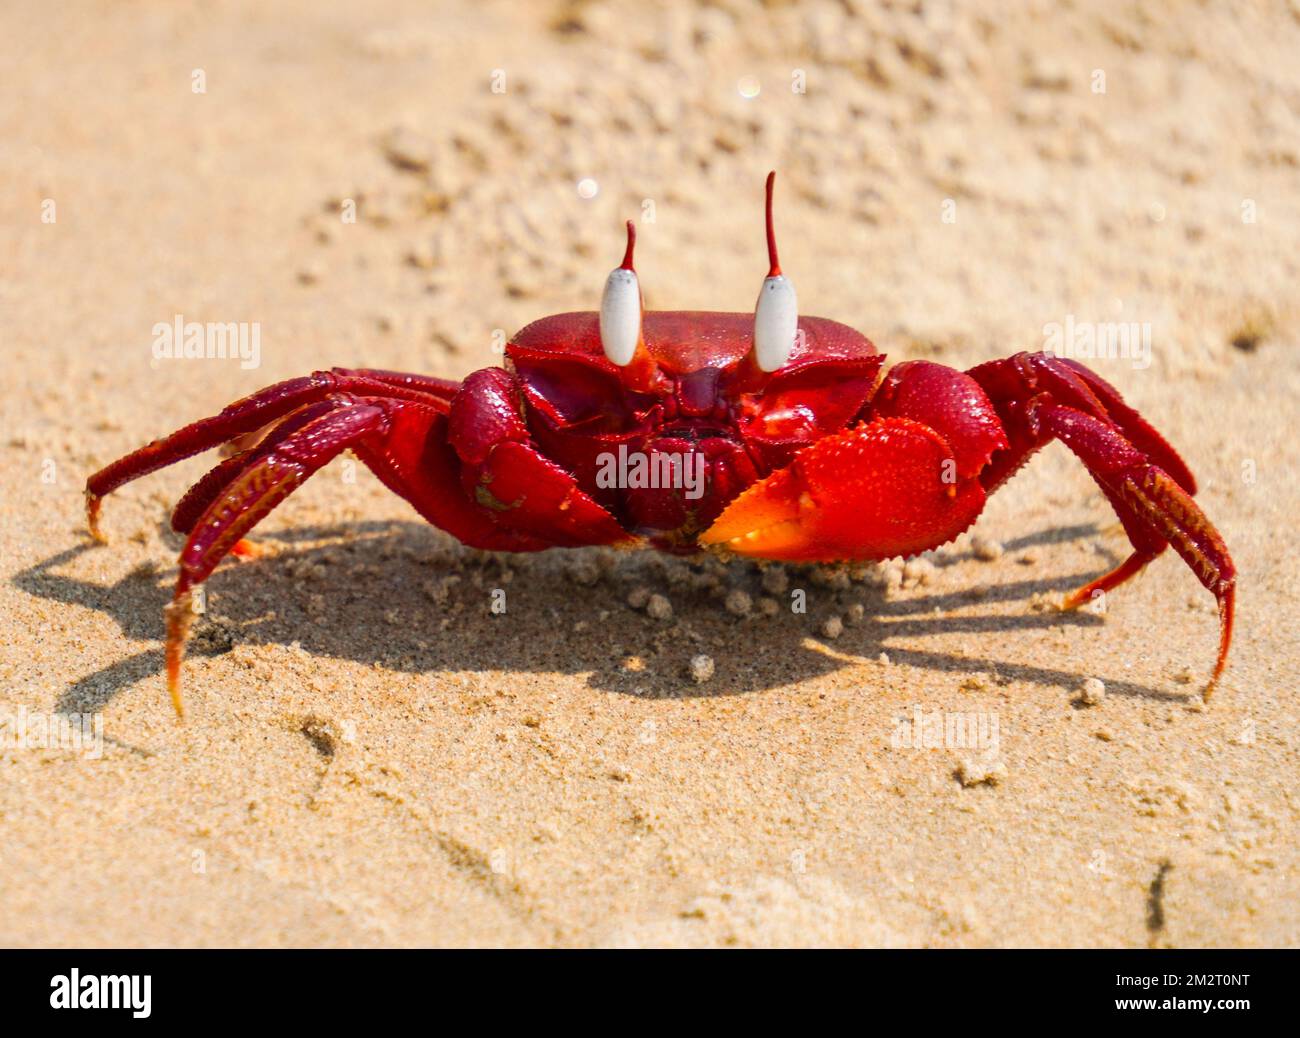 A close-up shot of a red earth crab on the sandy beach Stock Photo